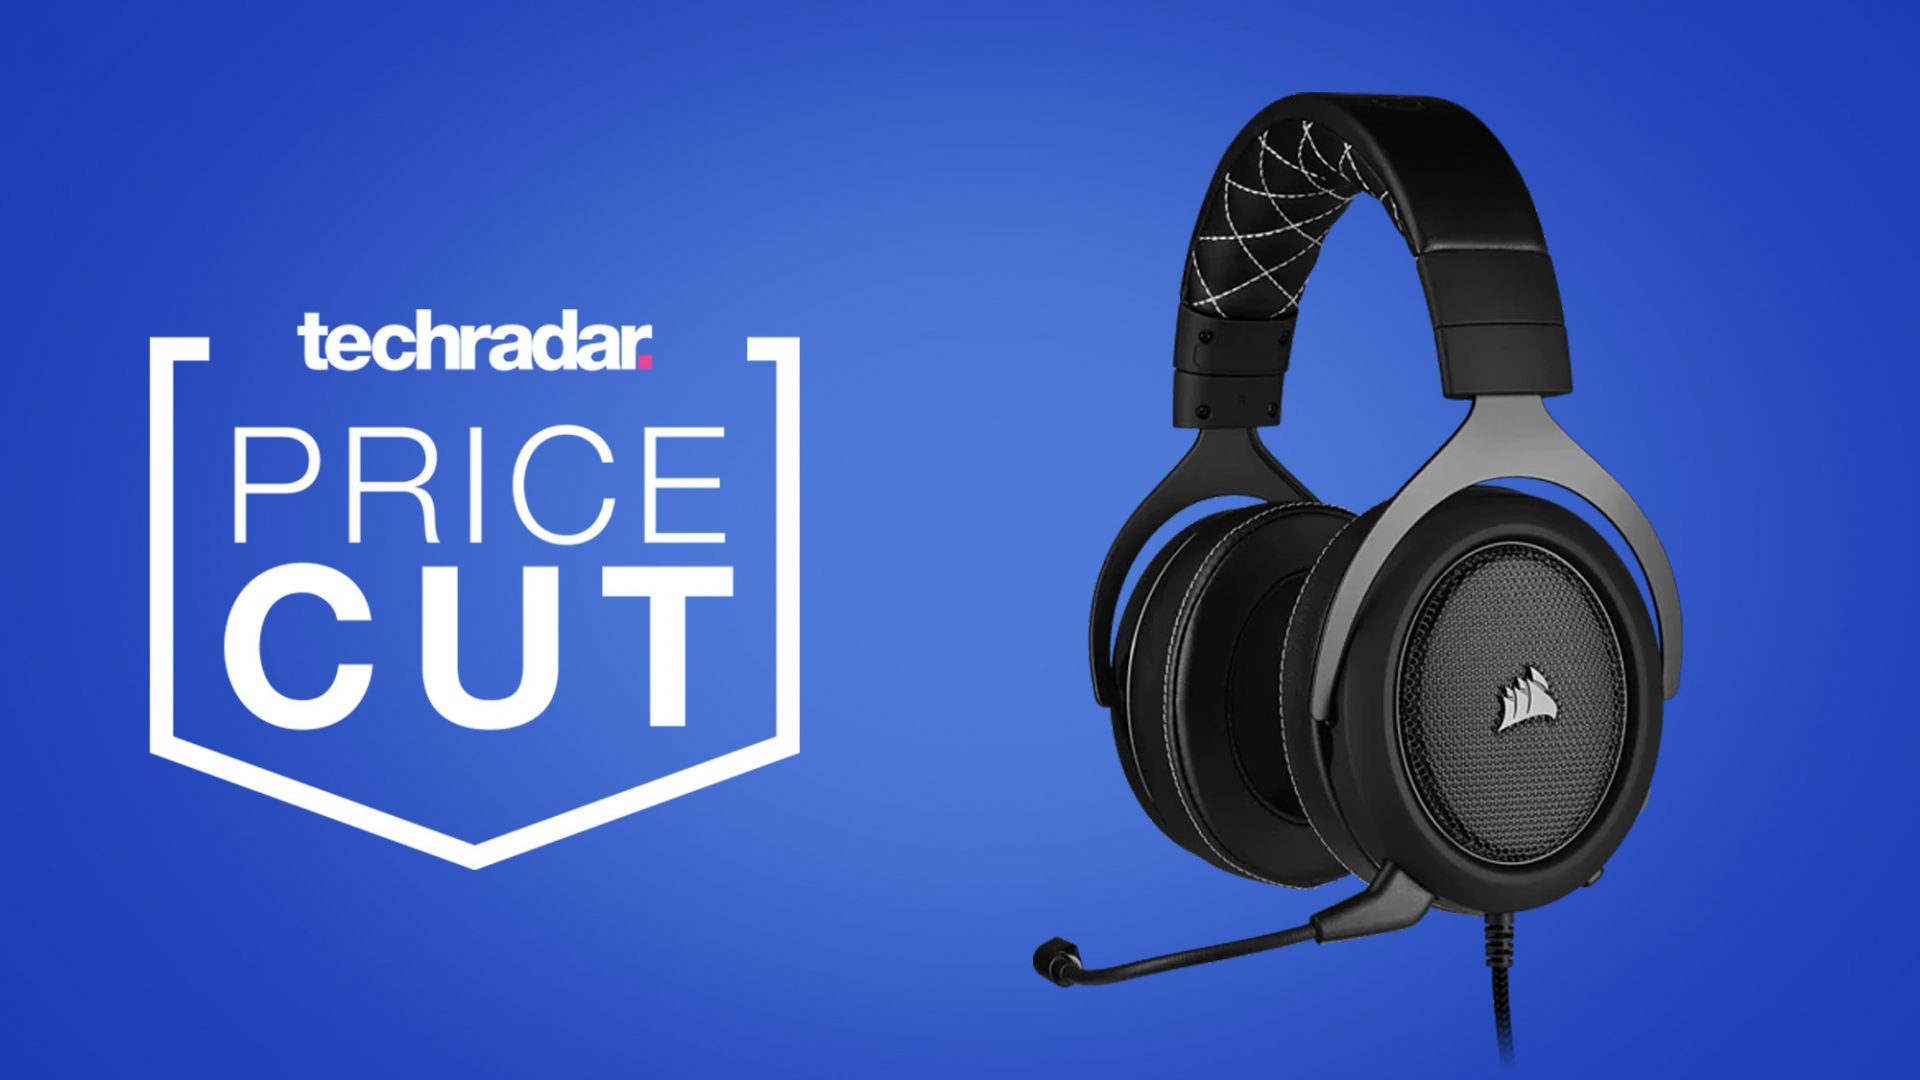 This Corsair HS60 Pro is below $50 in Amazon’s most modern gaming headset deals